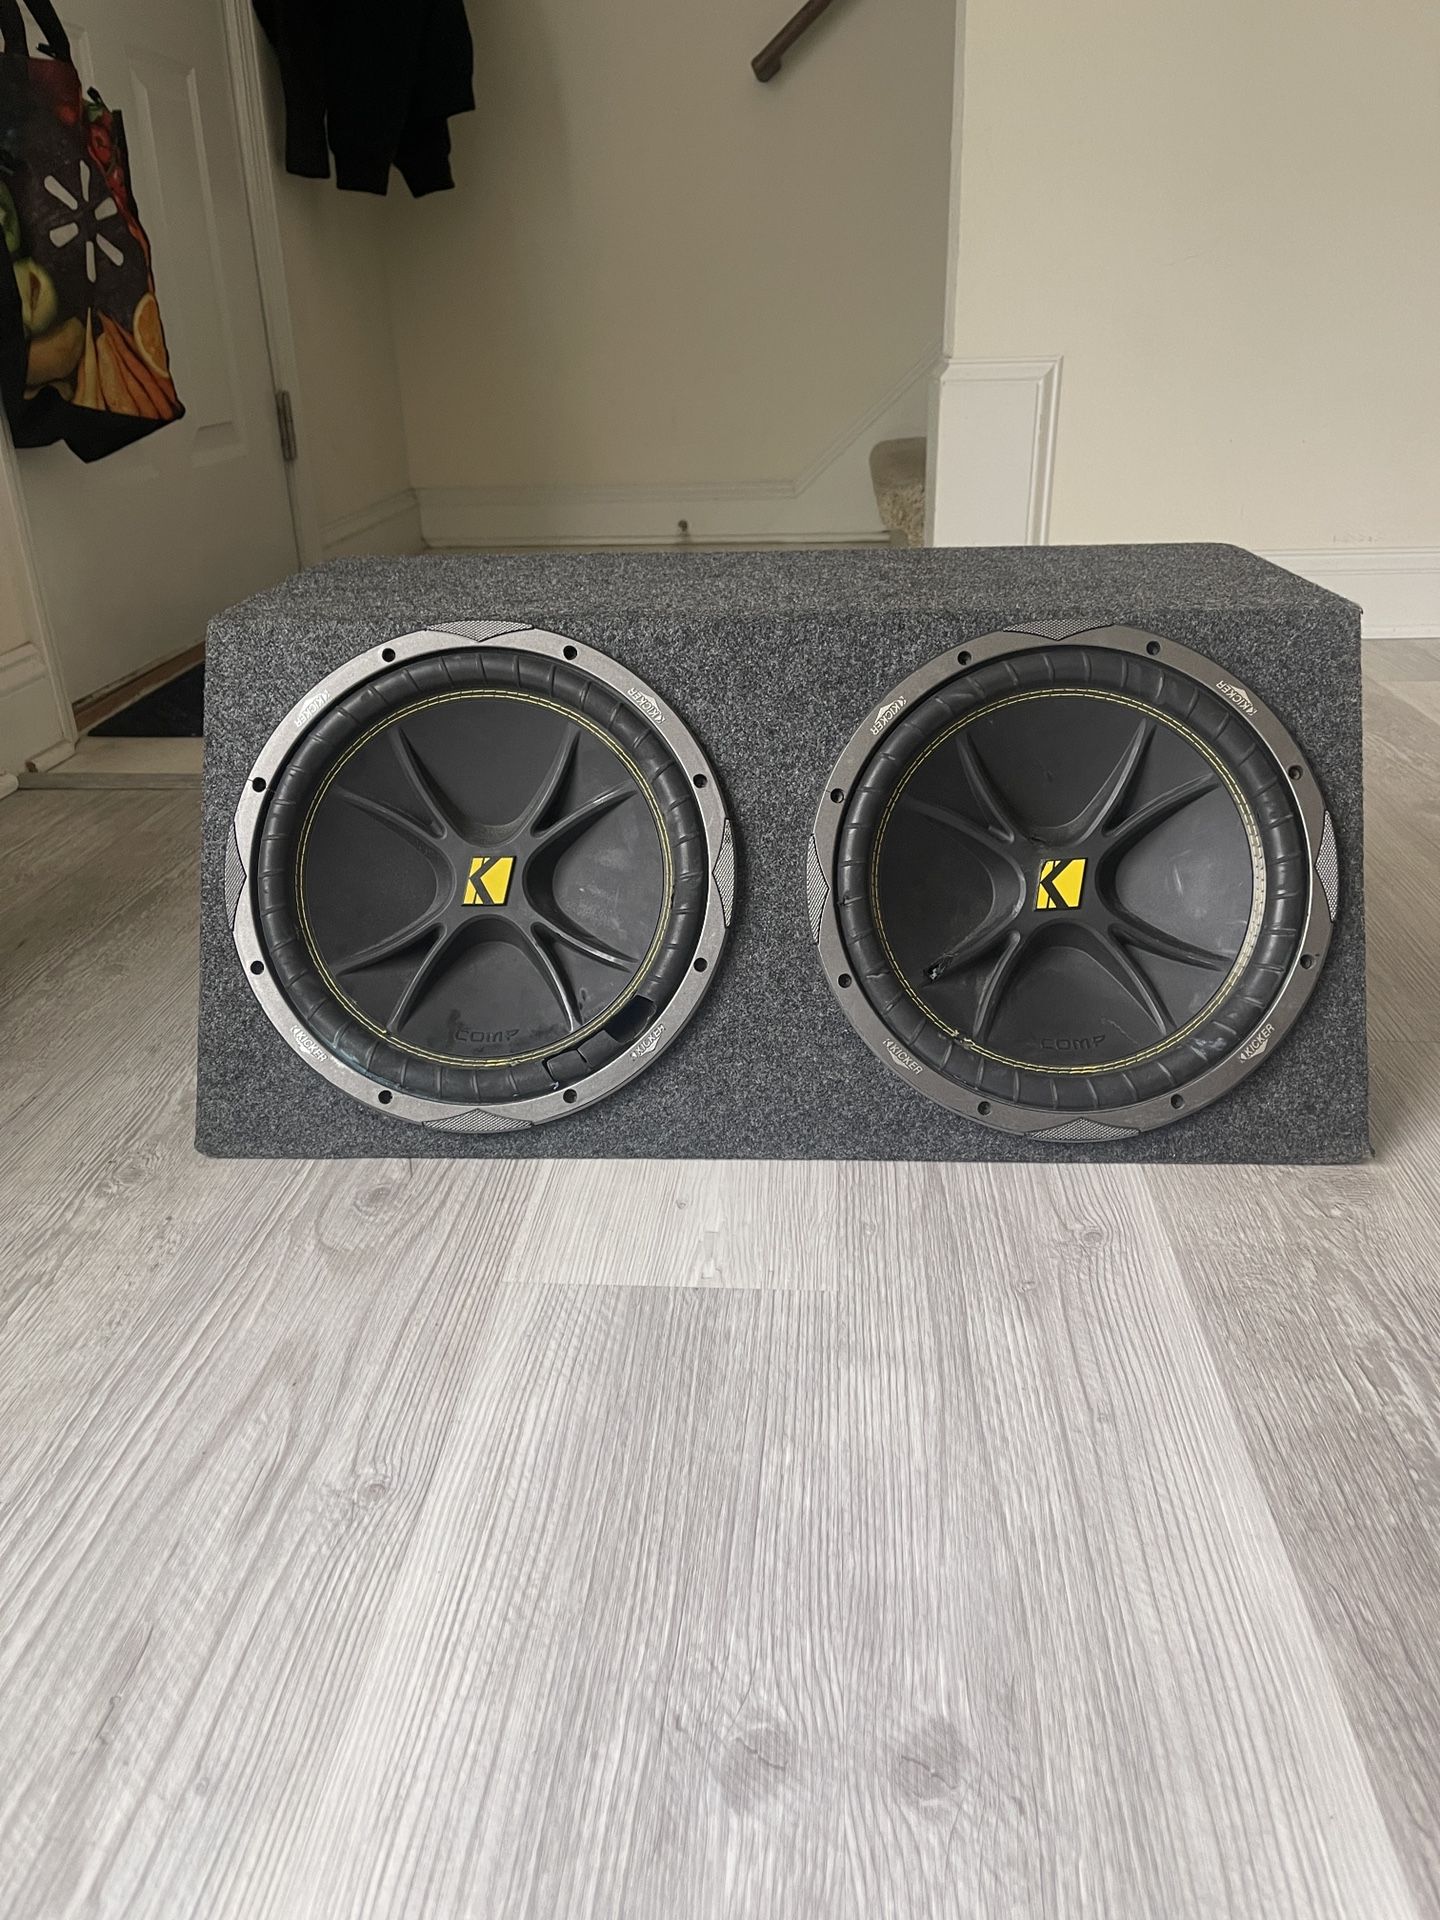 Two Kickers 12’ Inch Subwoofers